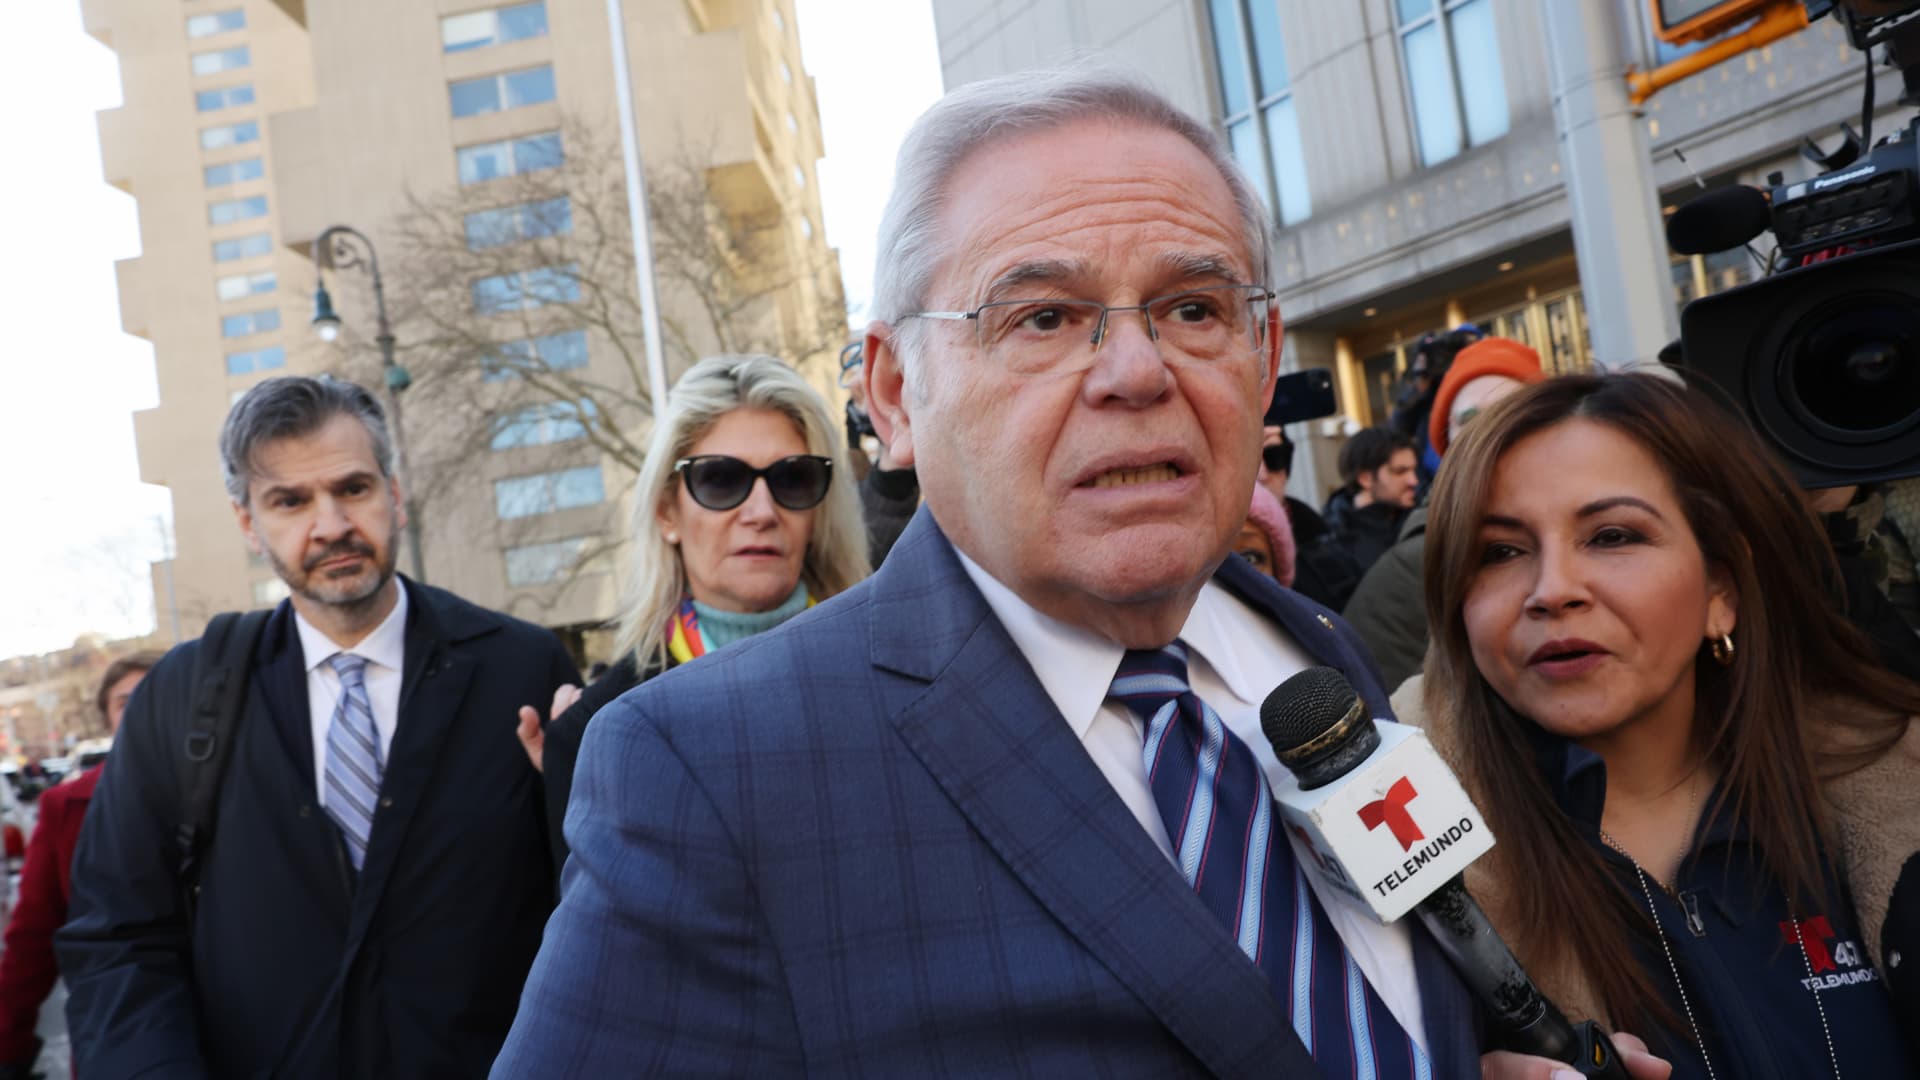 Bob Menendez grills official on illicit finance before bribery trial